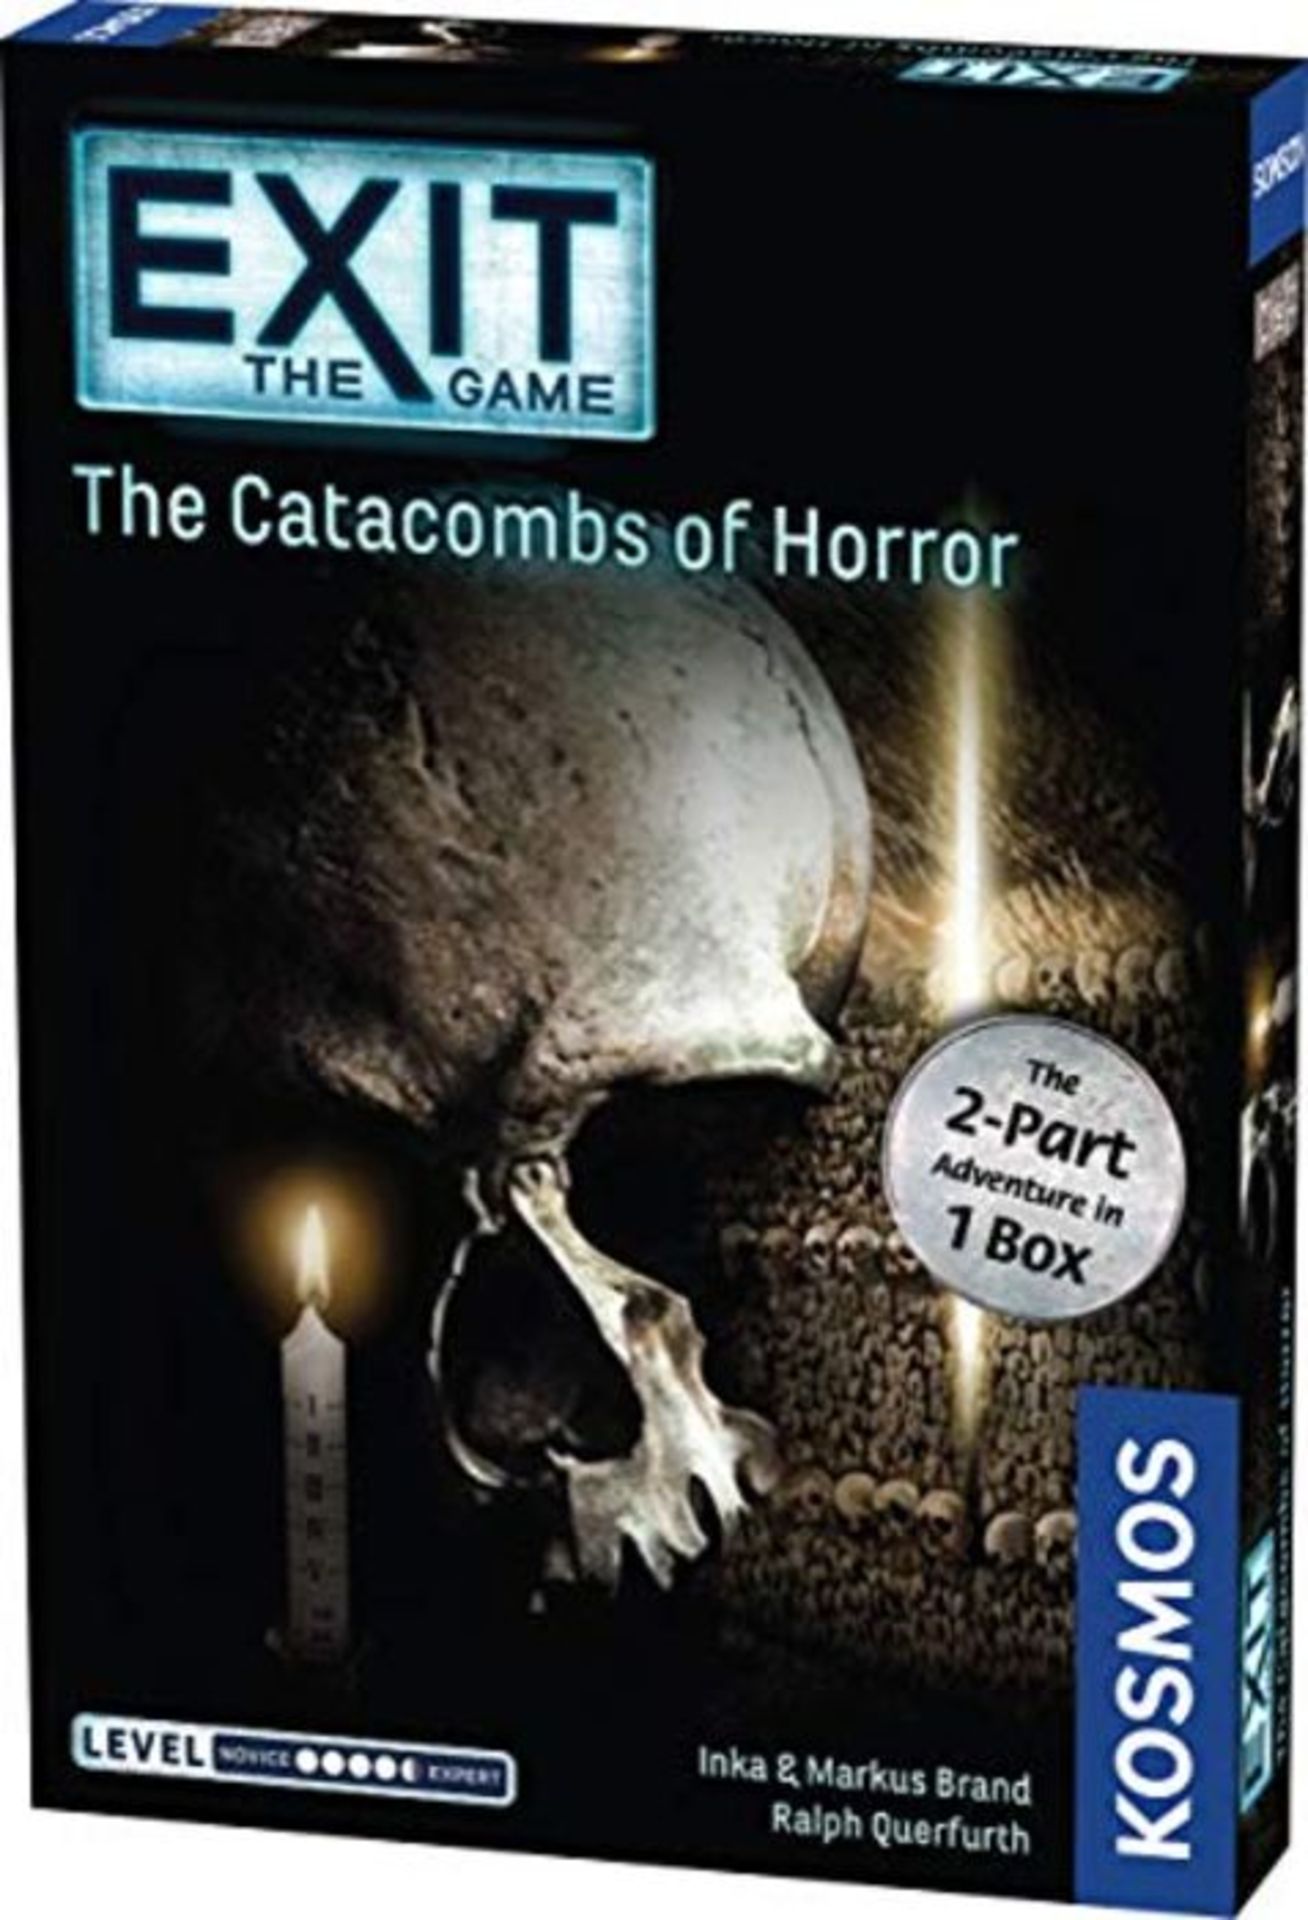 Thames & Kosmos 694289 EXIT Catacombs of Horror | Level: Professional | 2-Part Escape